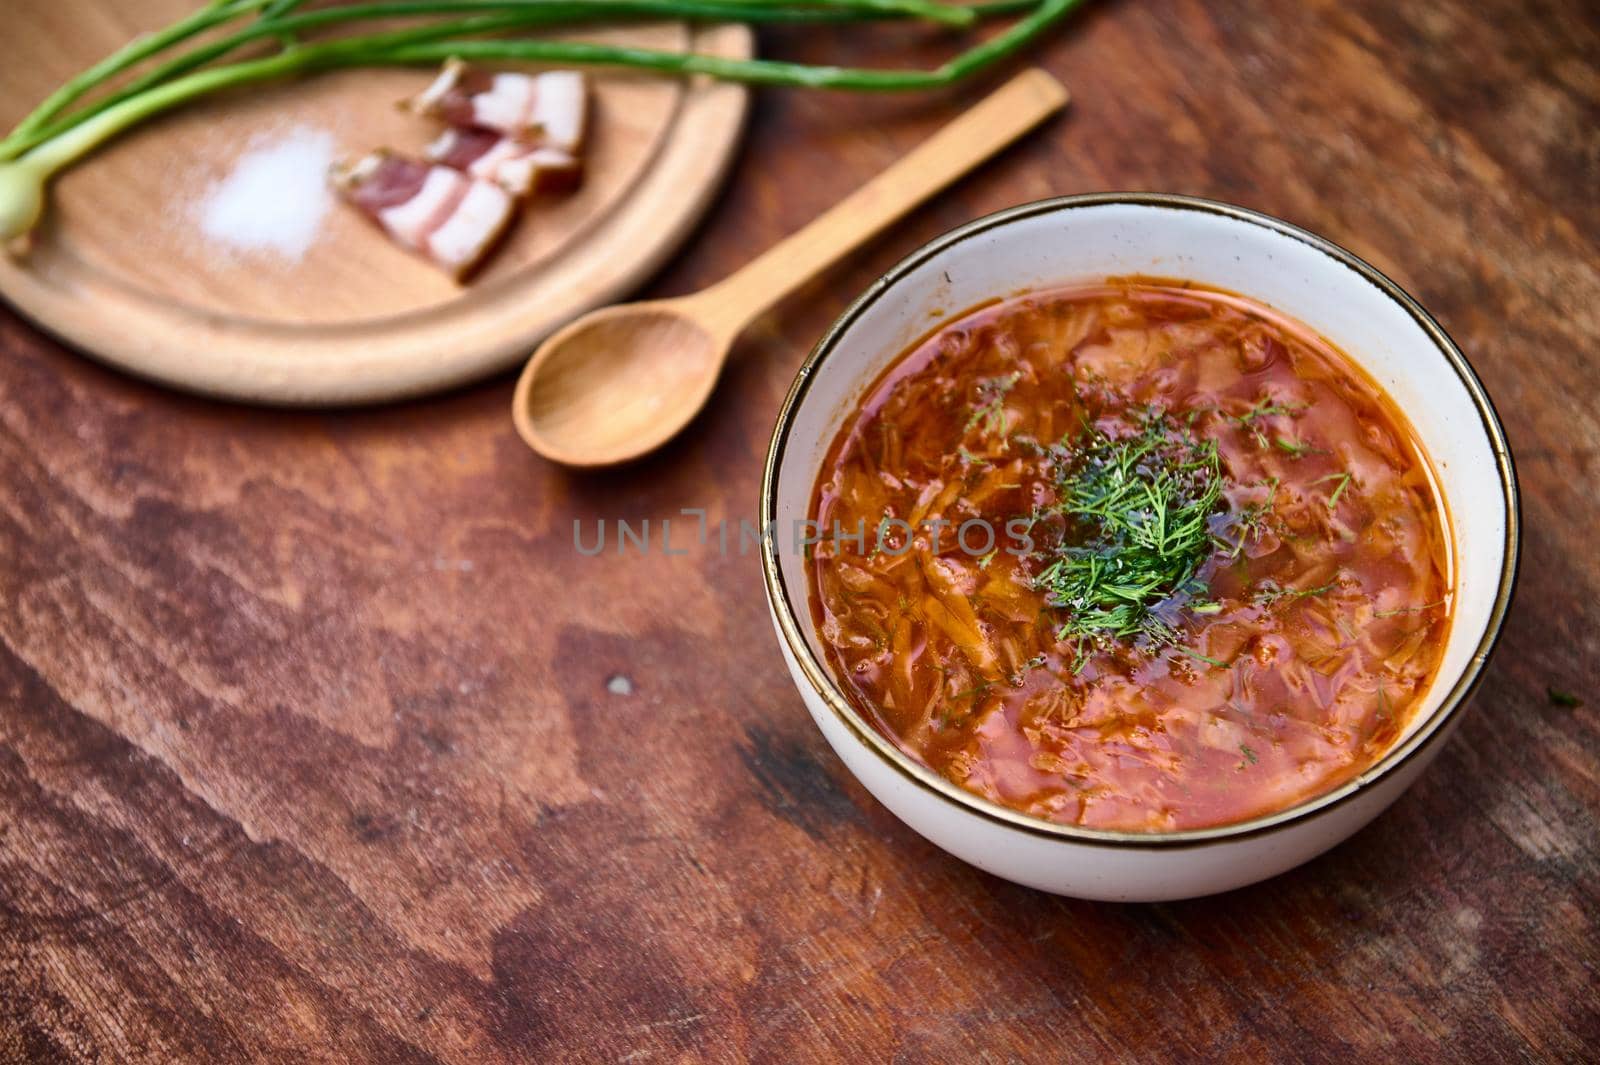 Ukrainian national dish: red beetroot soup - traditional tasty Borscht with parsley and dill, chopped bacon, salt and green onions nearby on a wooden board against a wood table background